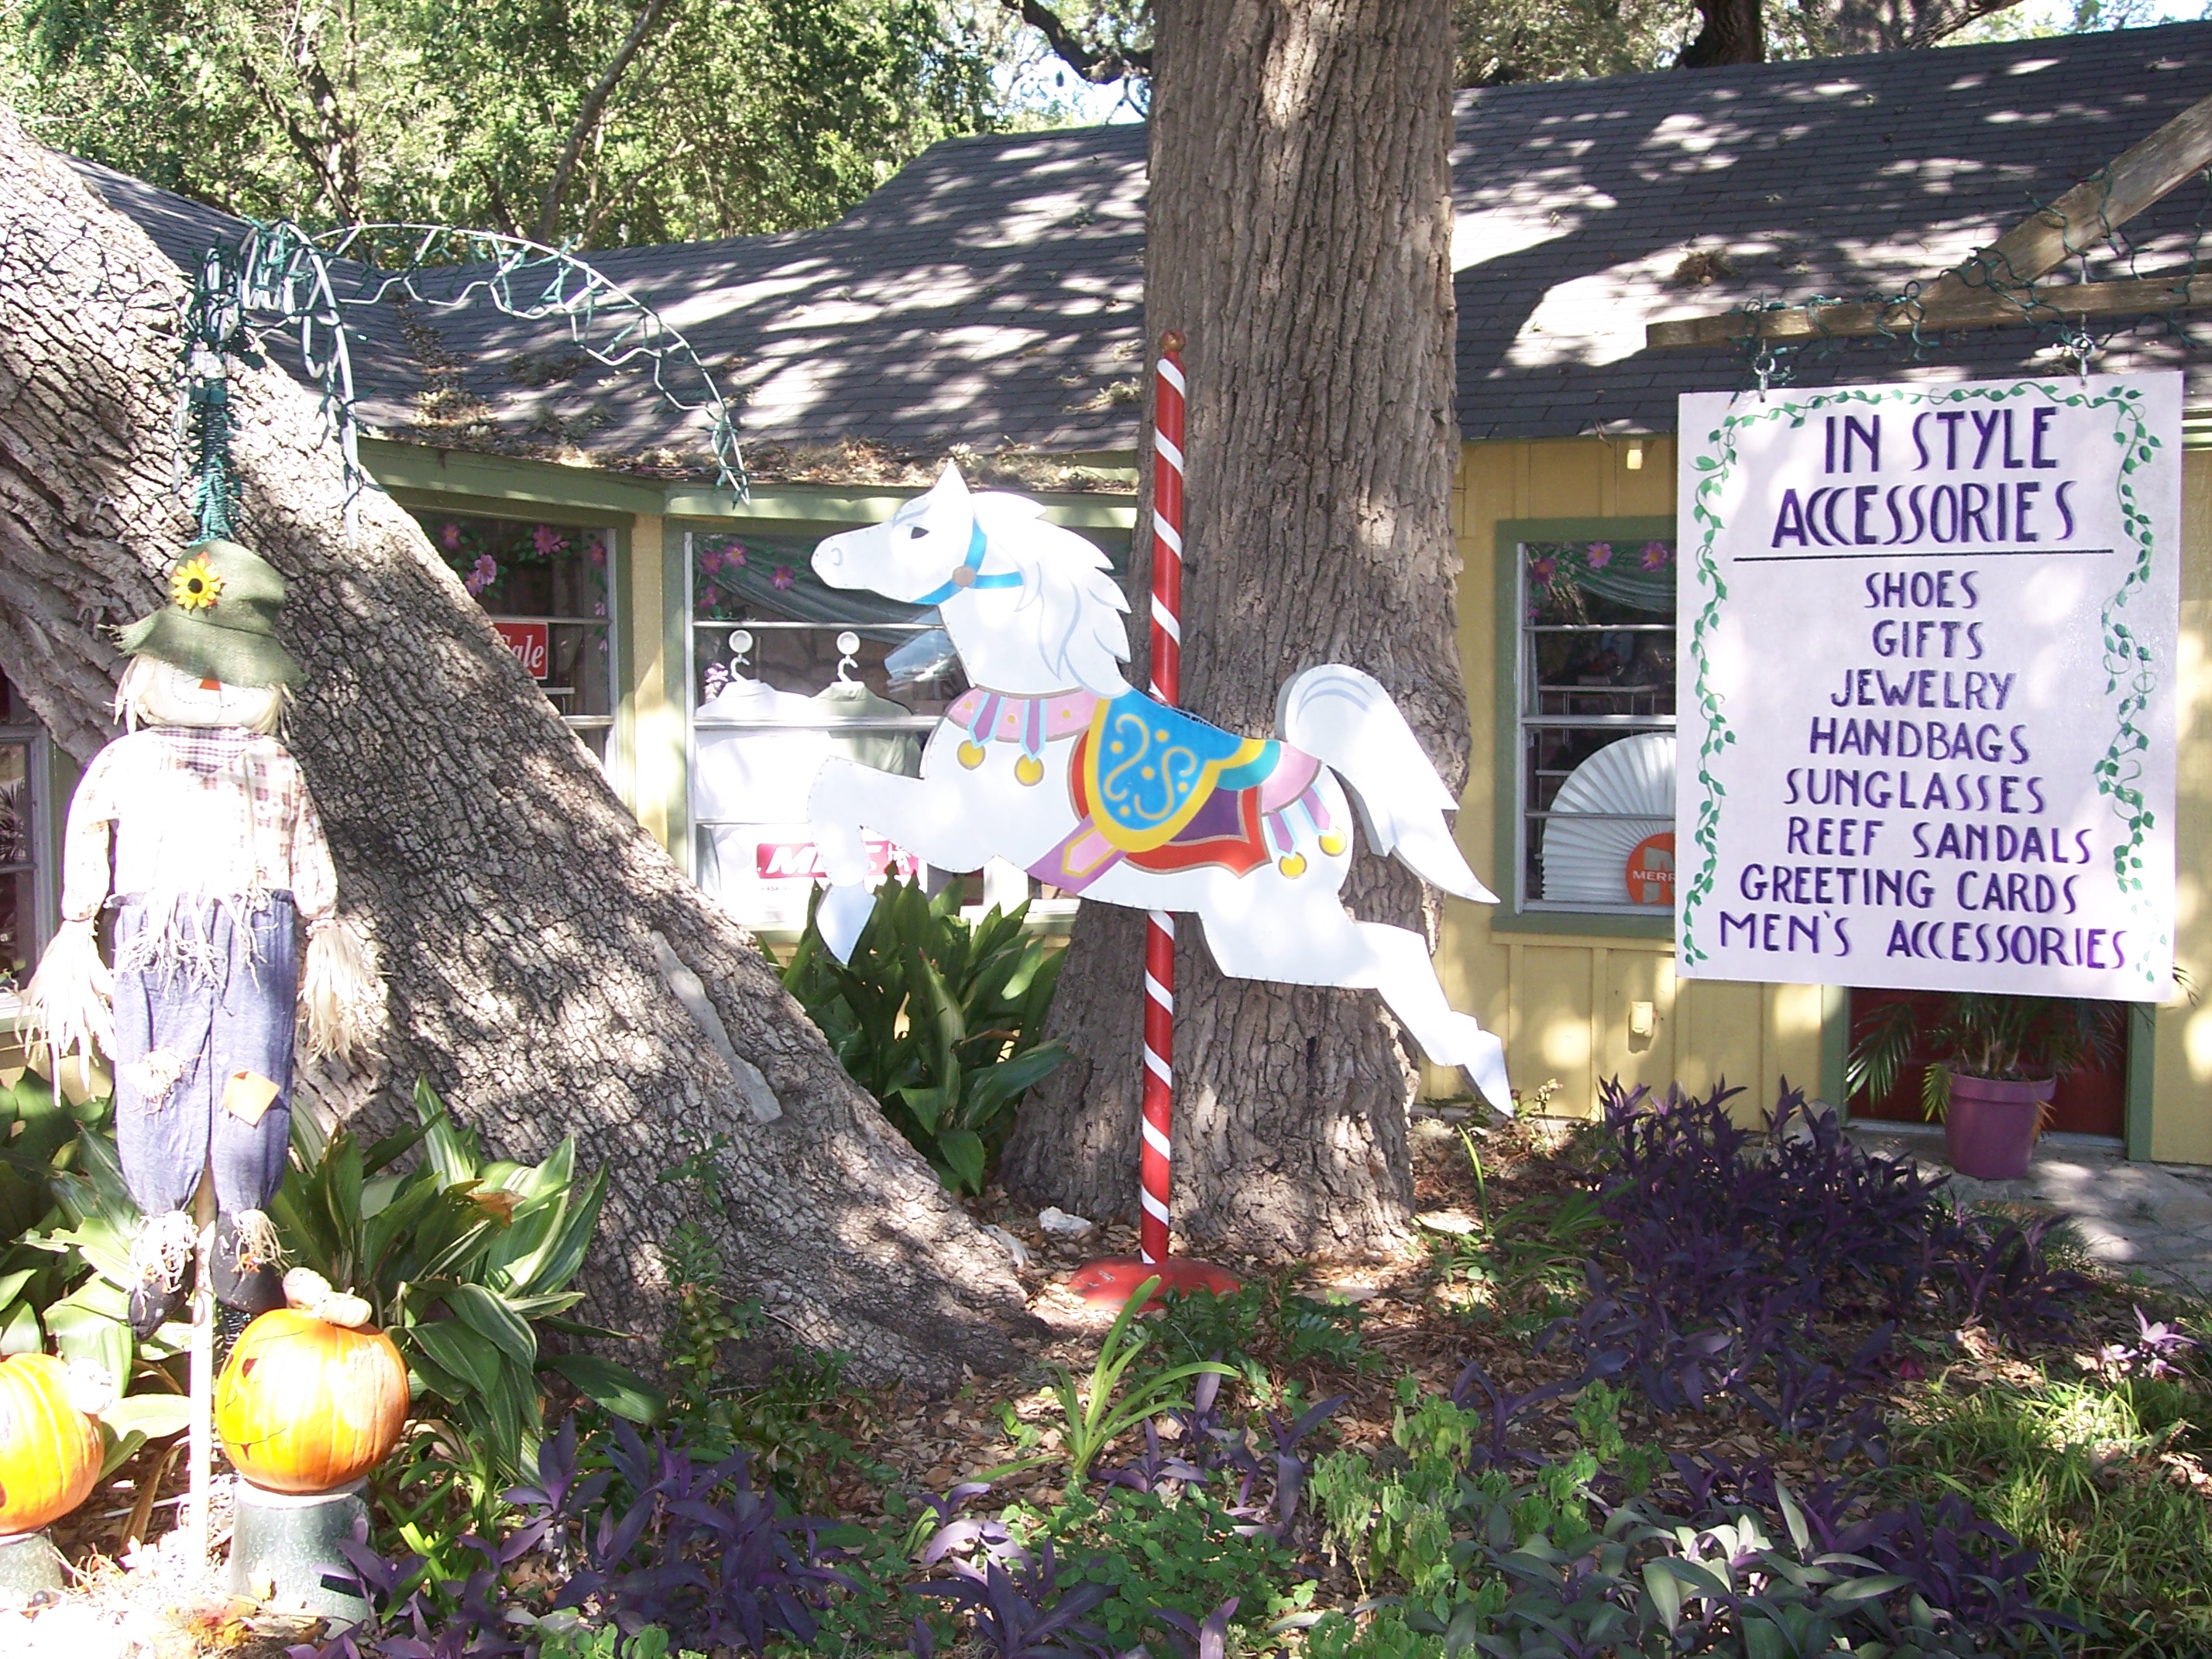 Some of the many stores Avaliable at Wimberley